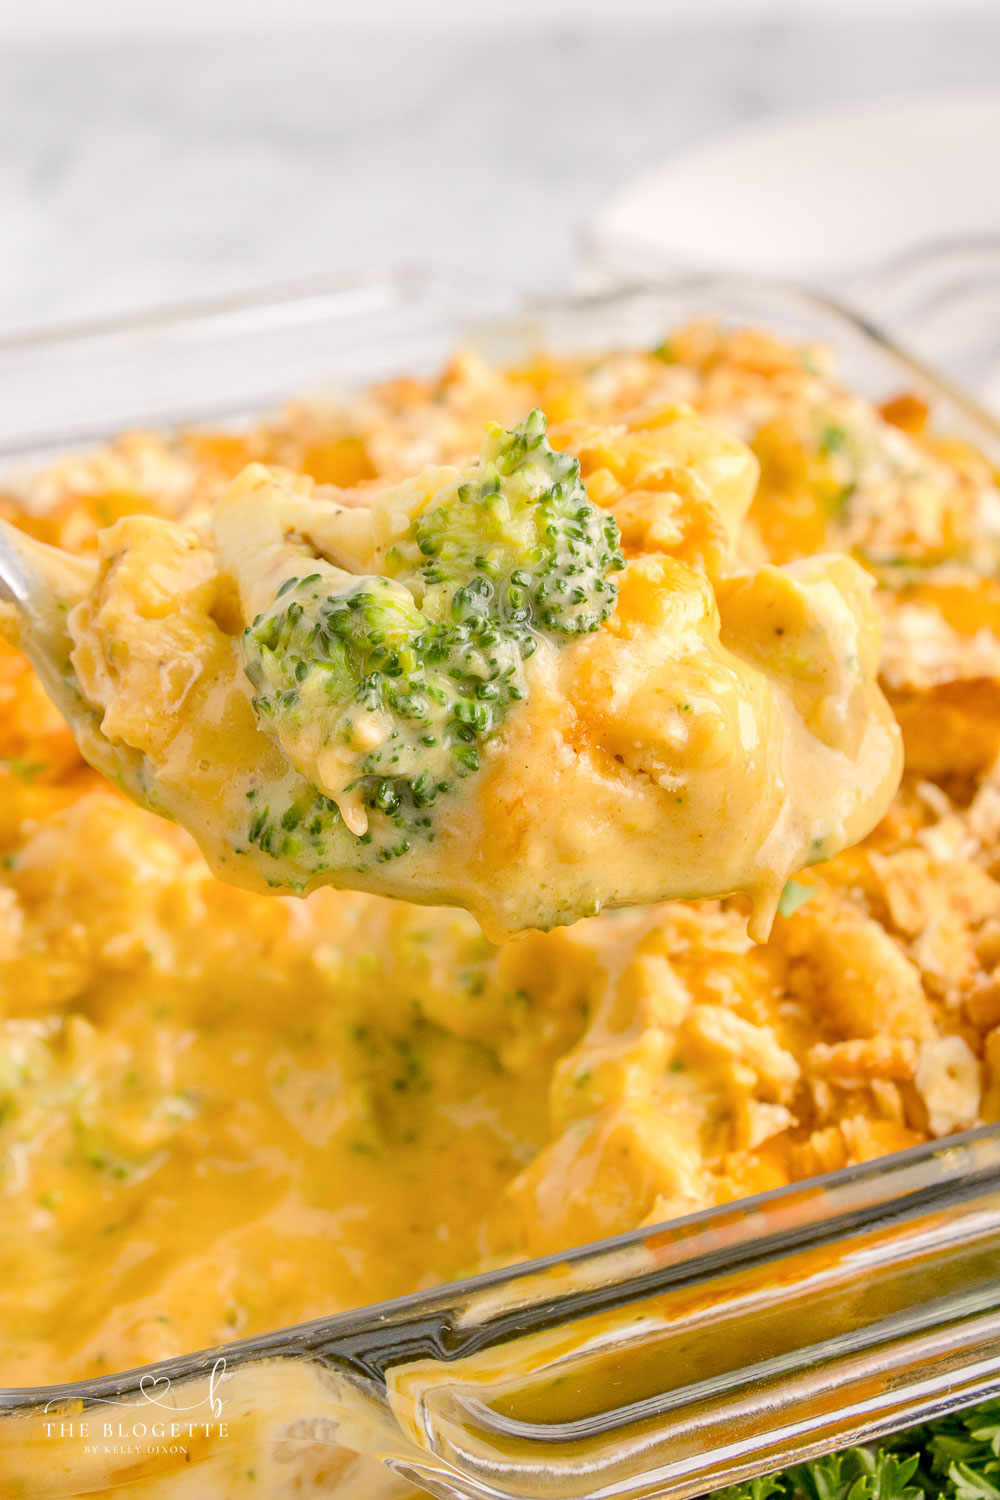 Chicken Divan is made with chicken, broccoli, and cream sauce, then topped with crackers. It's easy to make and perfect for a weeknight meal.